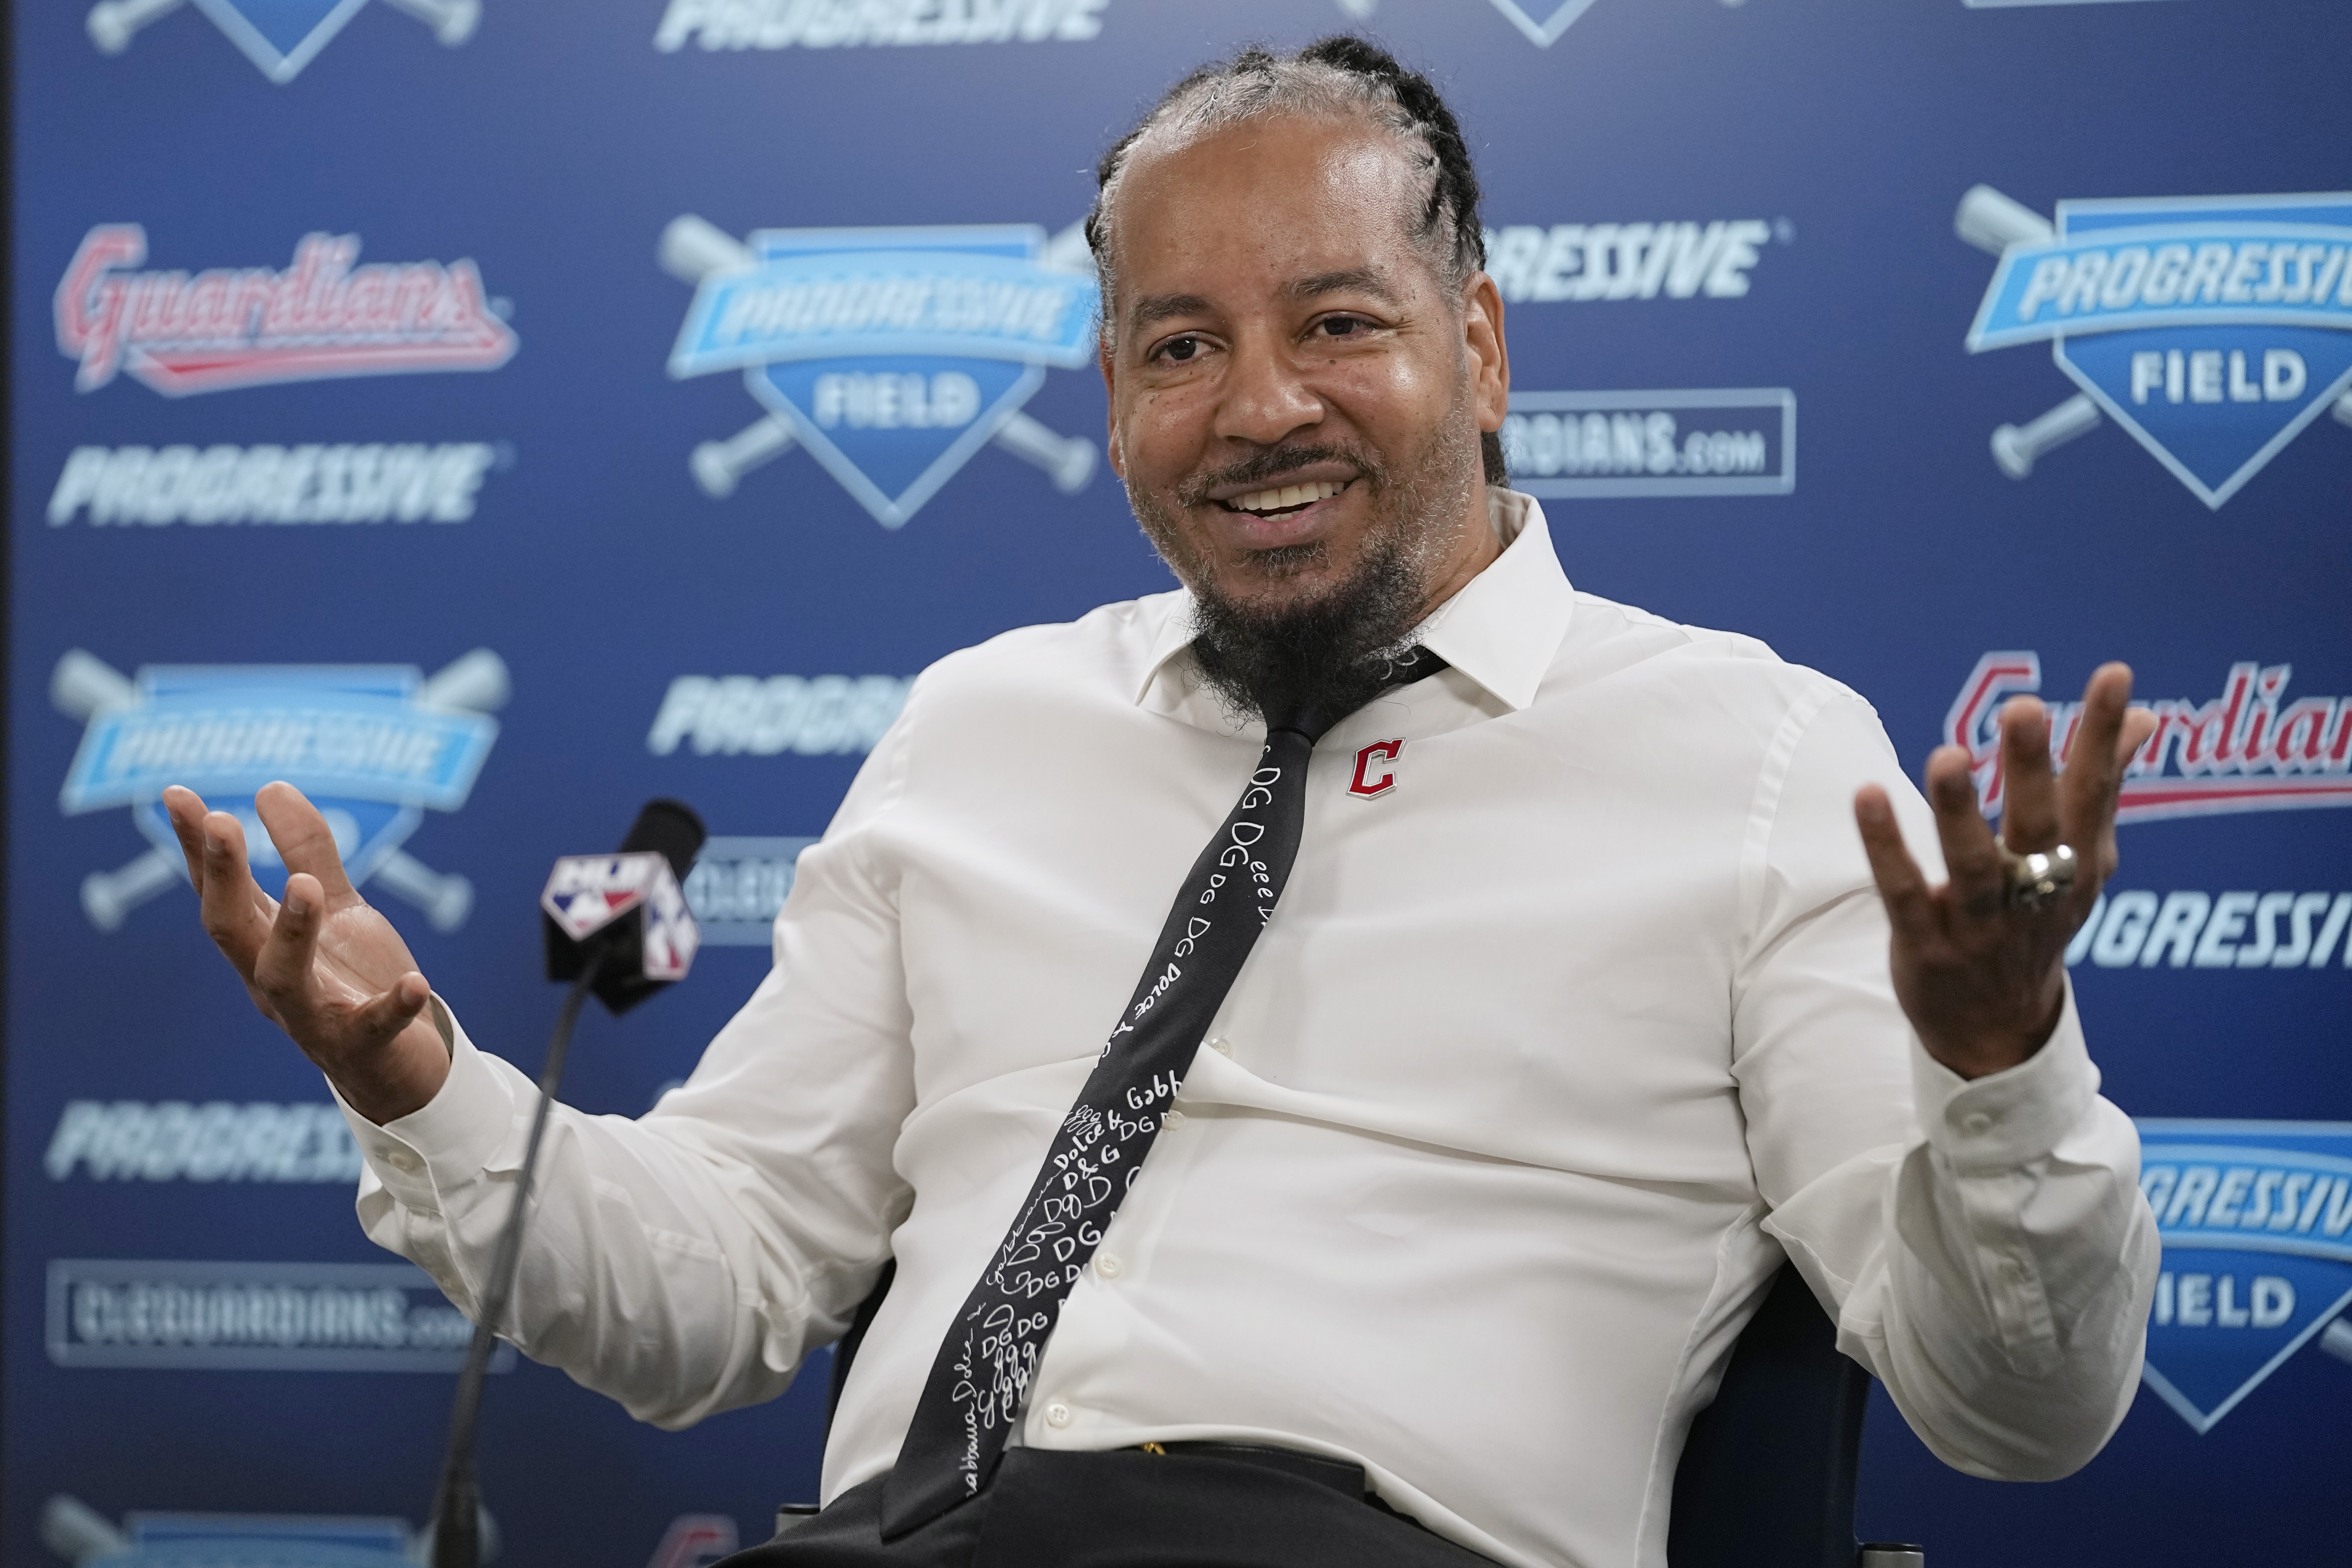 Manny being Manny? Red Sox legend reveals what's next in career at